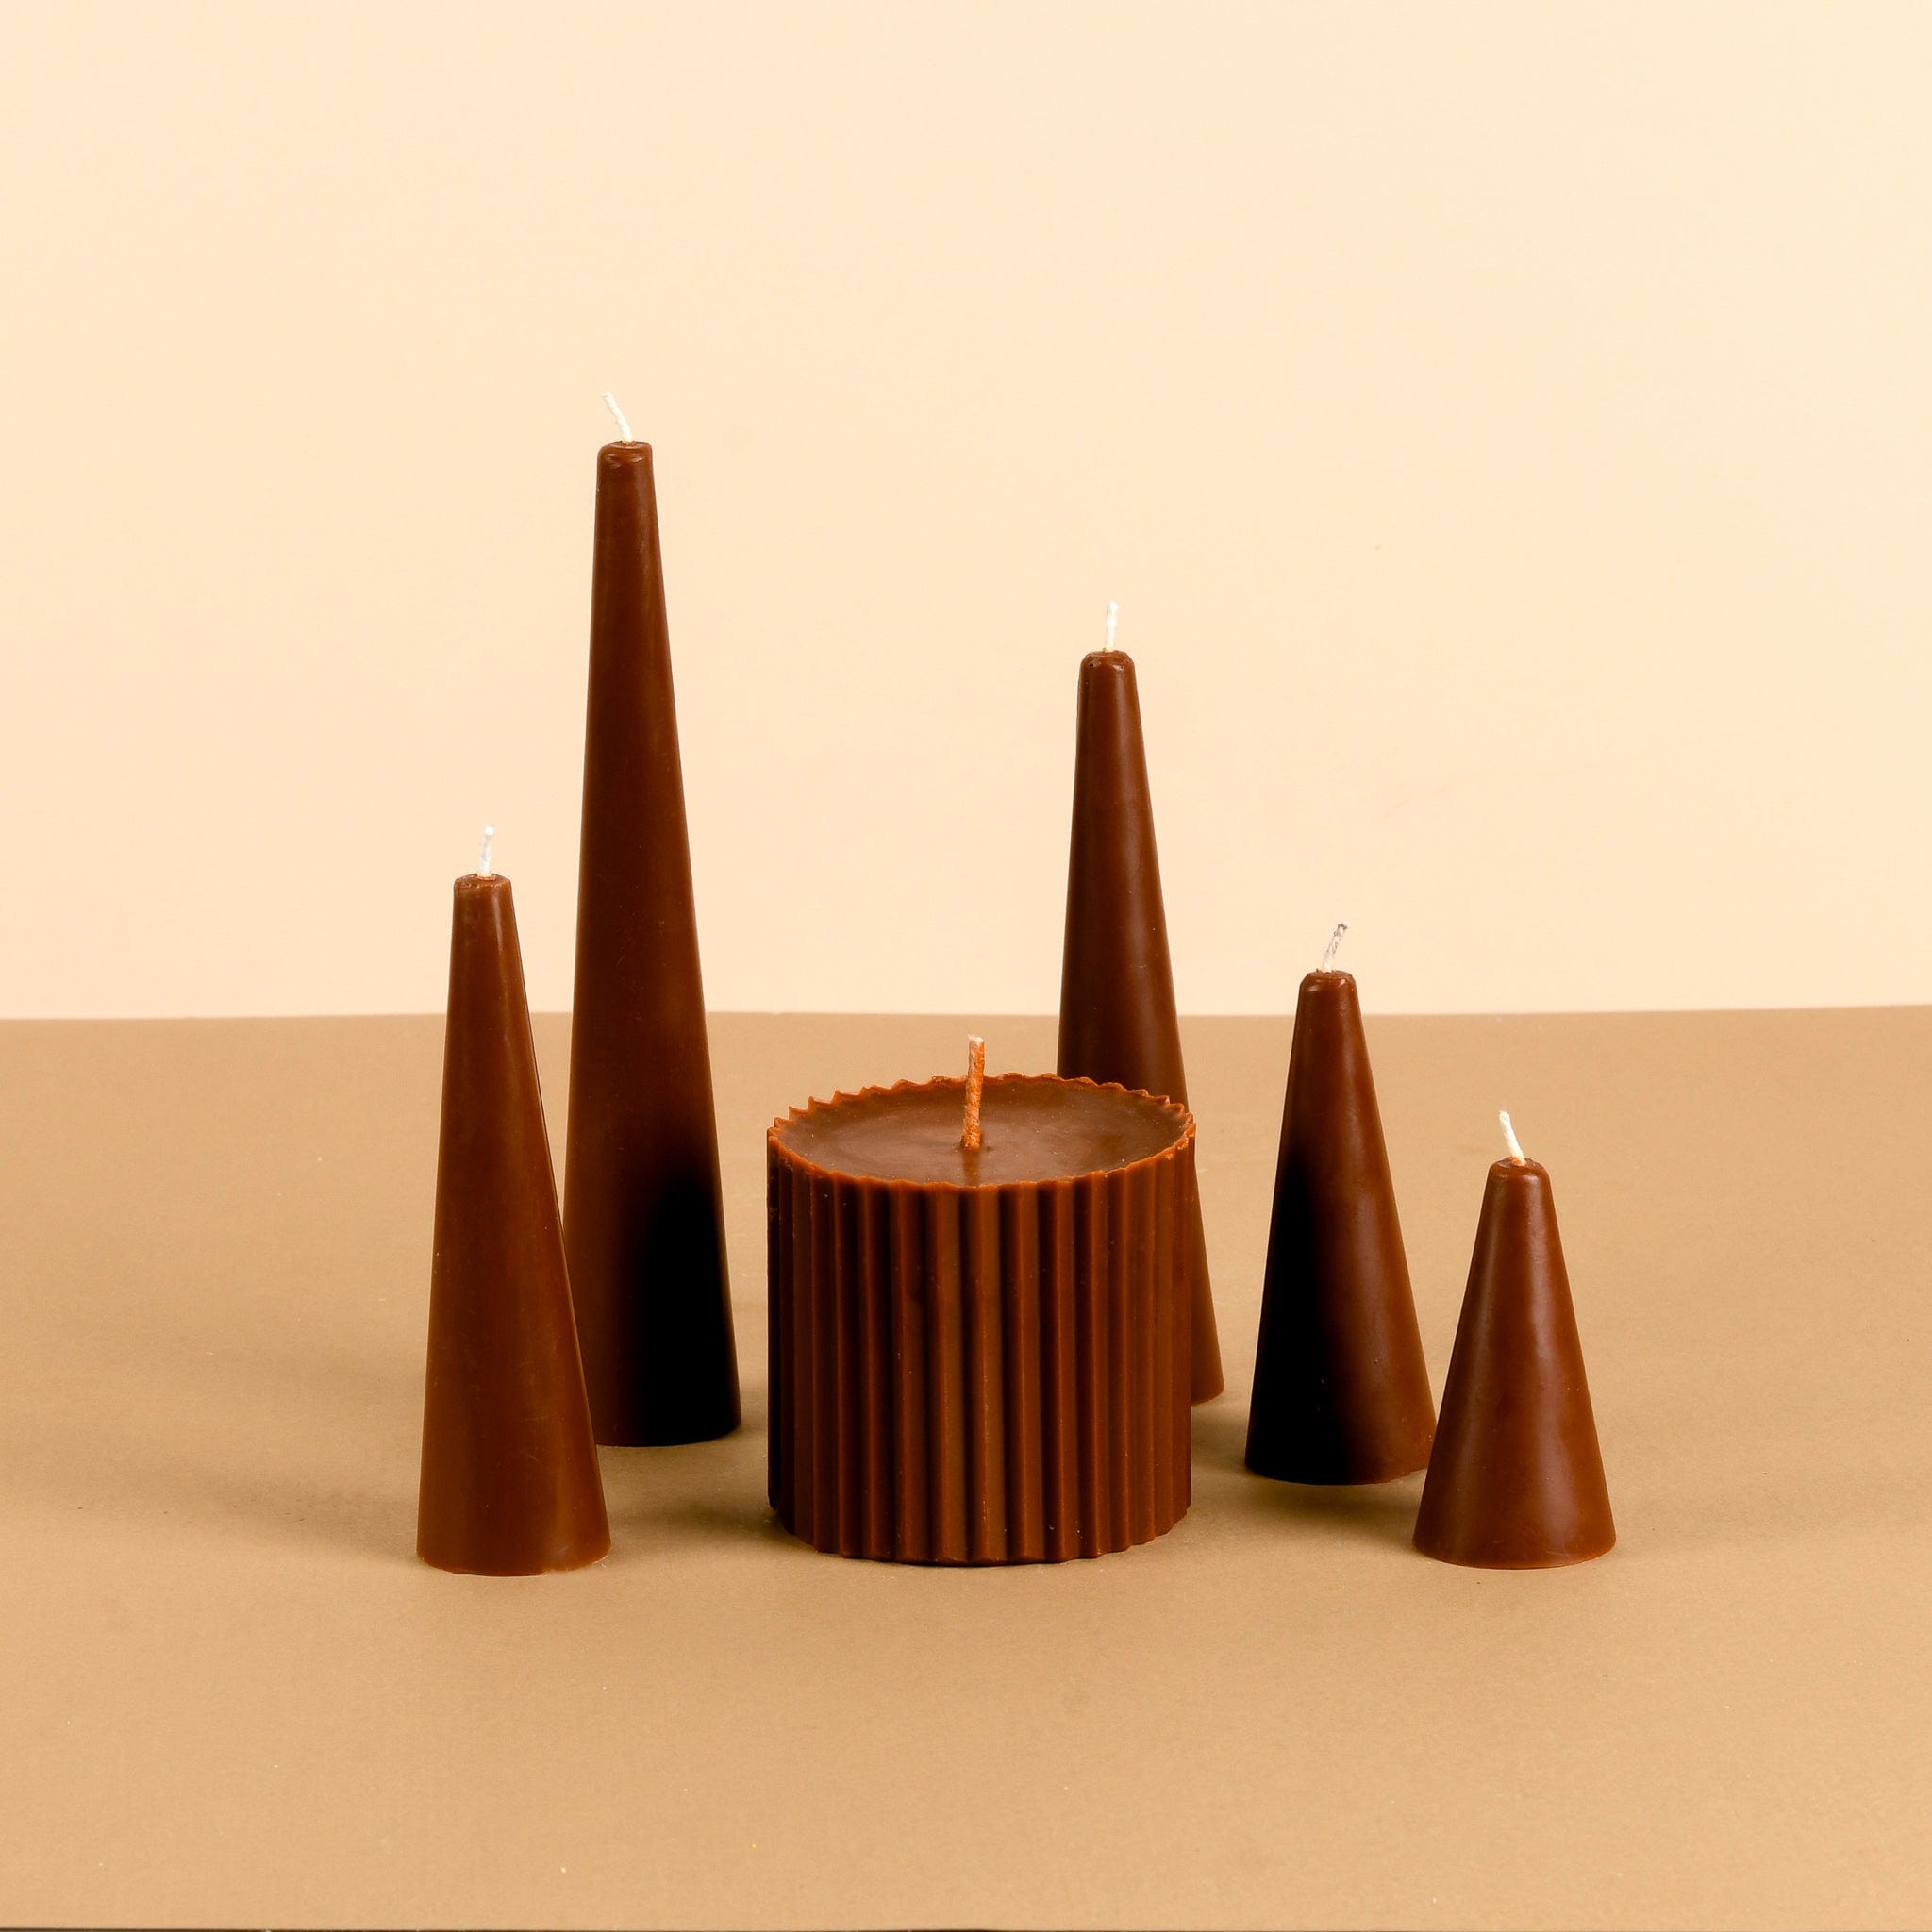 Infinity Set of 6 Chocolate Brown Candles - Tarte au Chocolat Scented